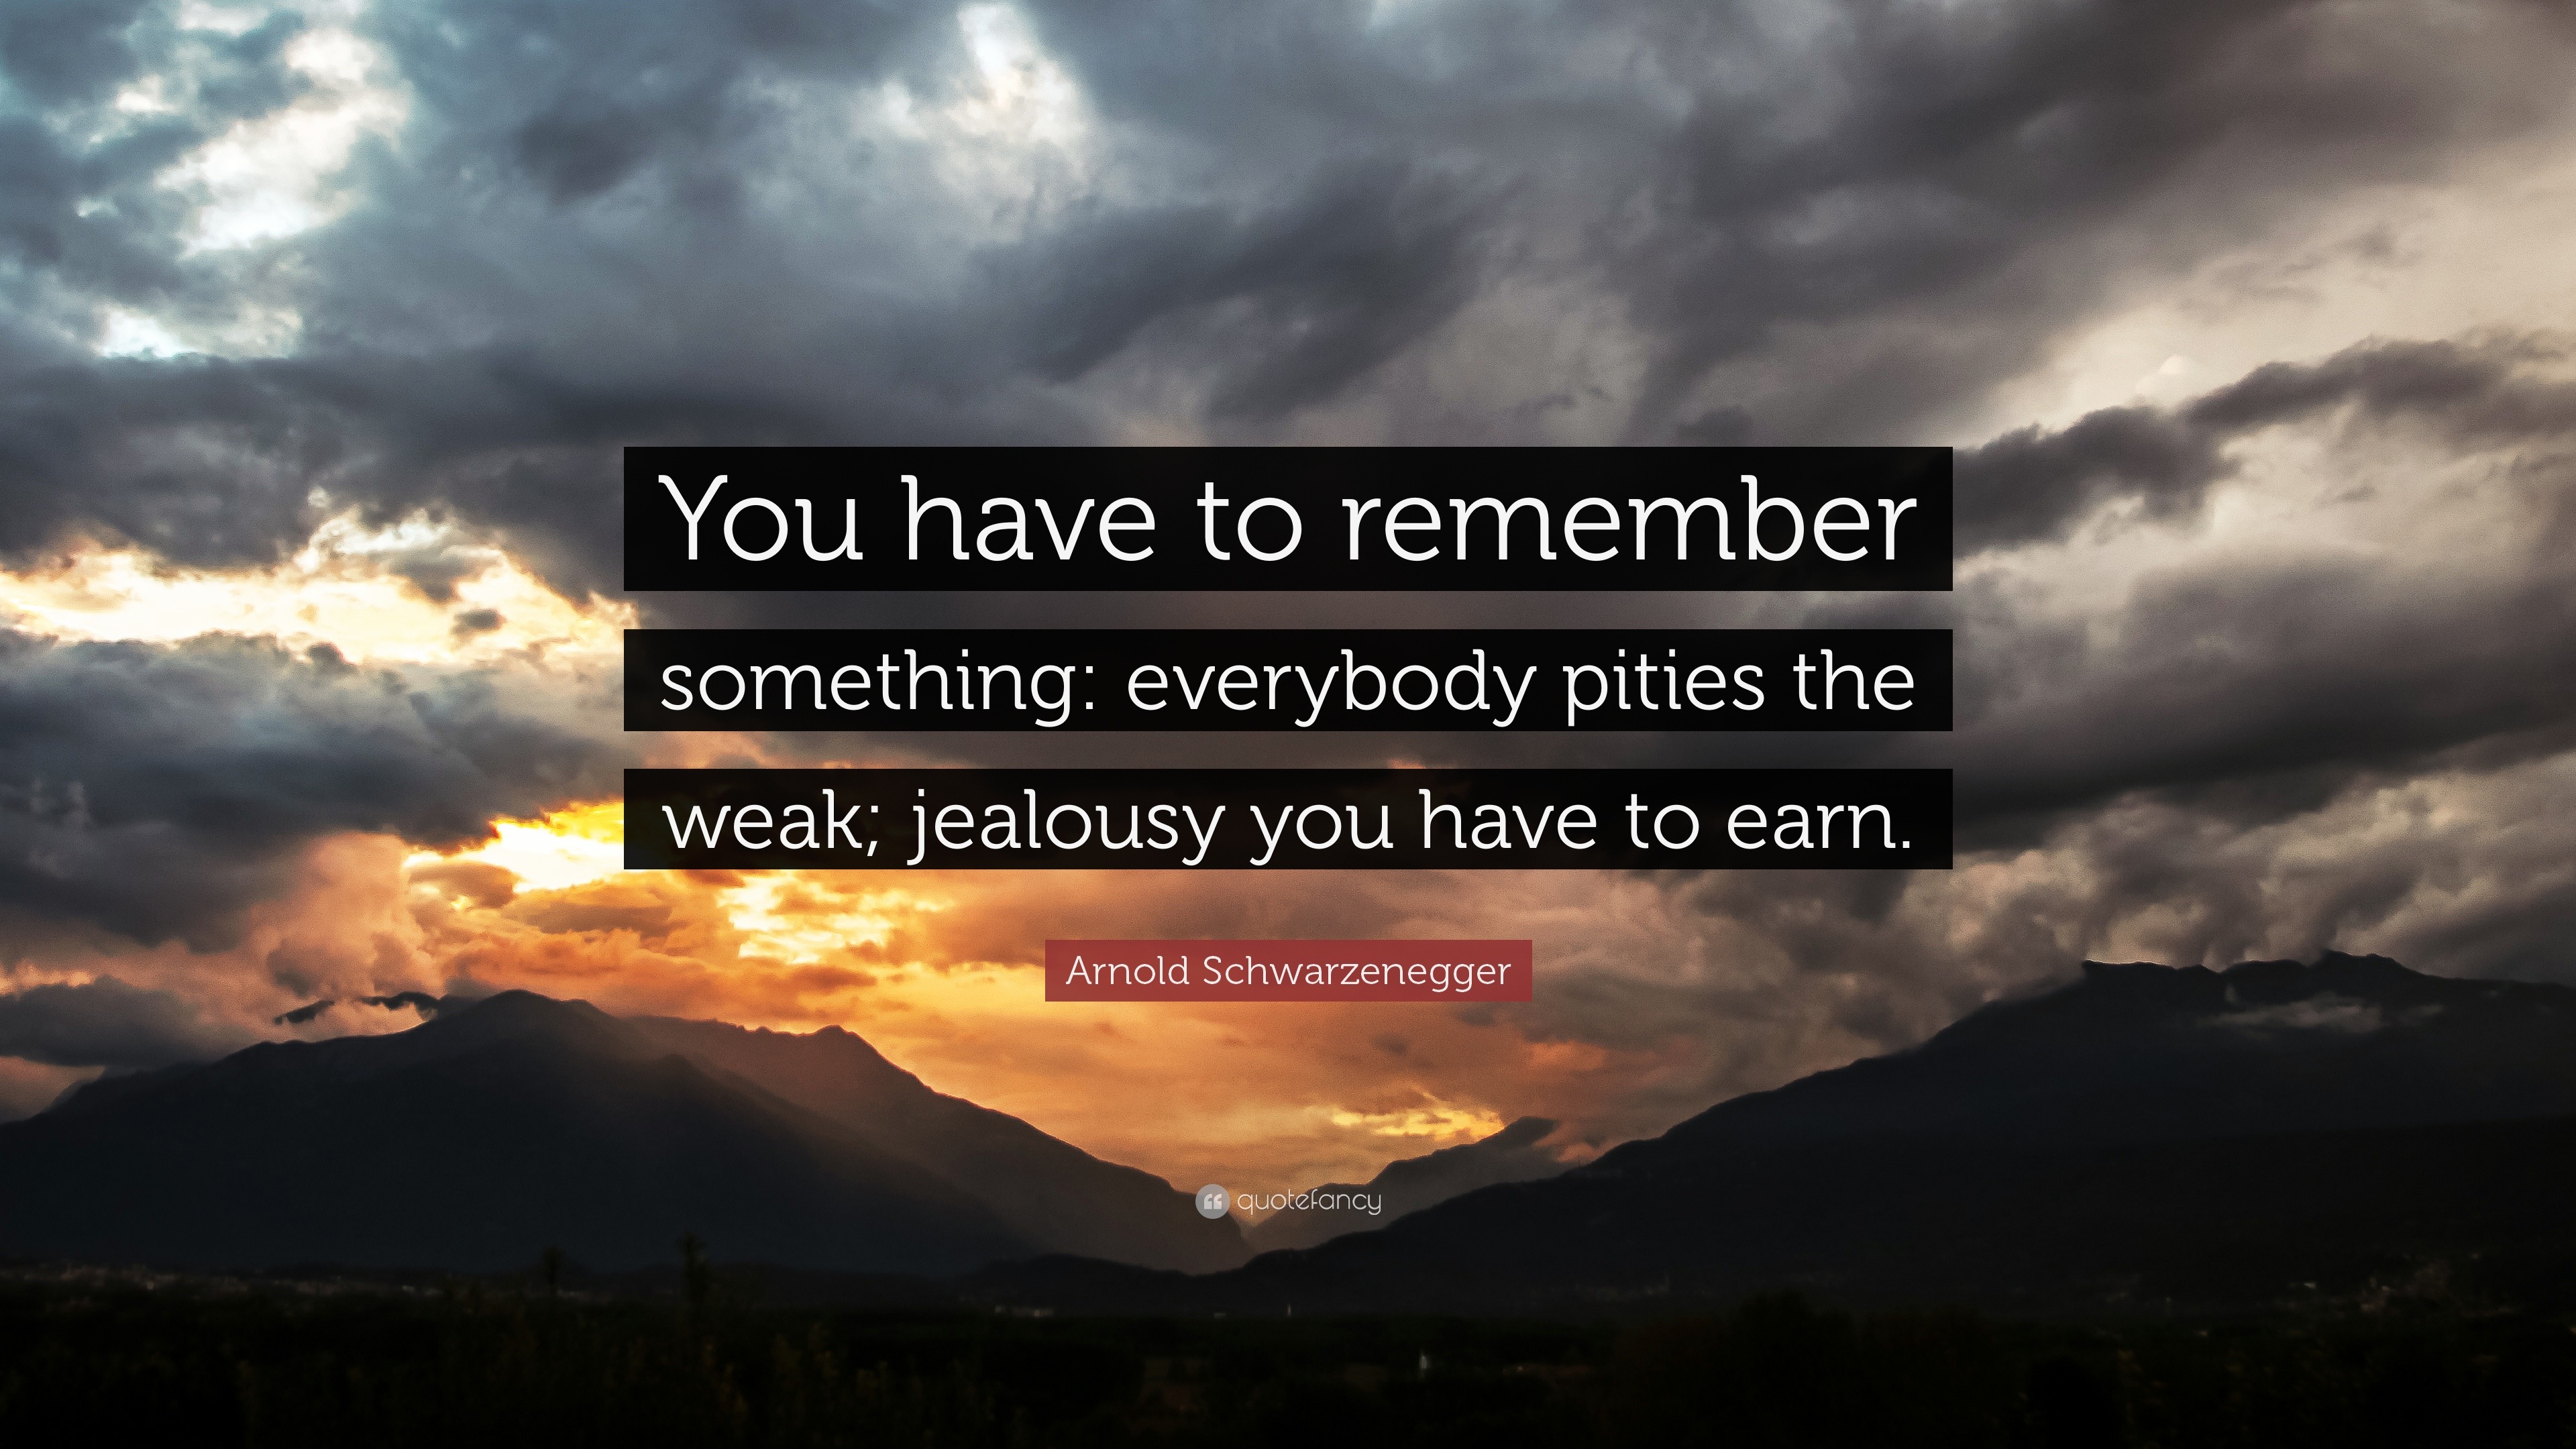 Arnold Schwarzenegger Quote “You have to remember something everybody pities the weak